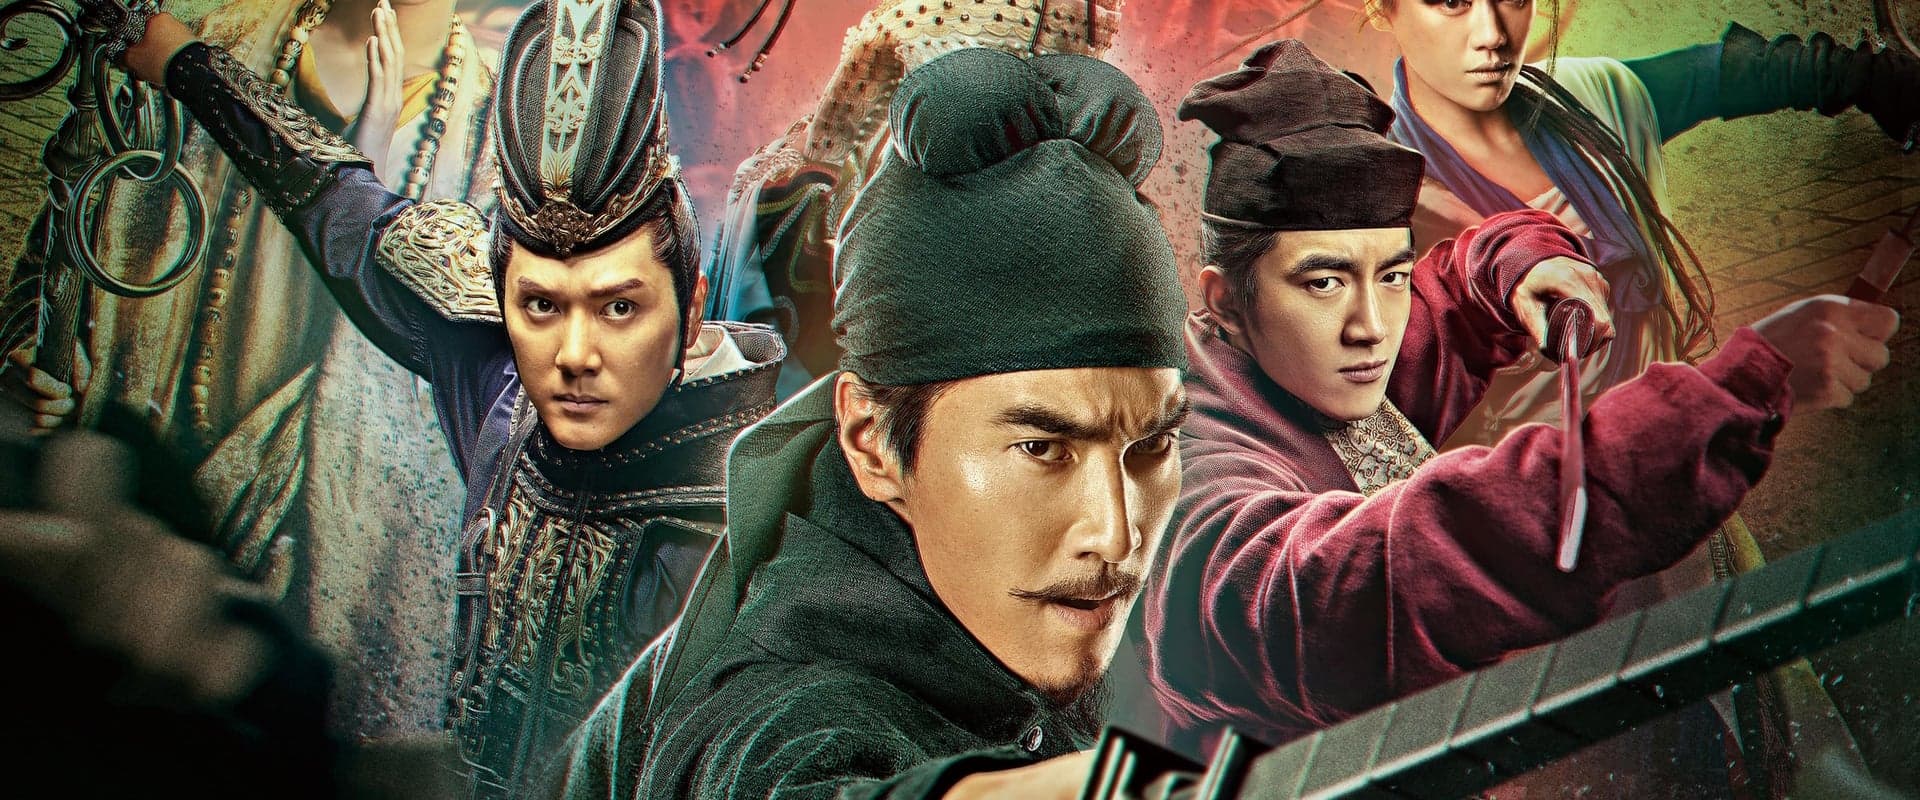 Detective Dee: The Four Heavenly Kings